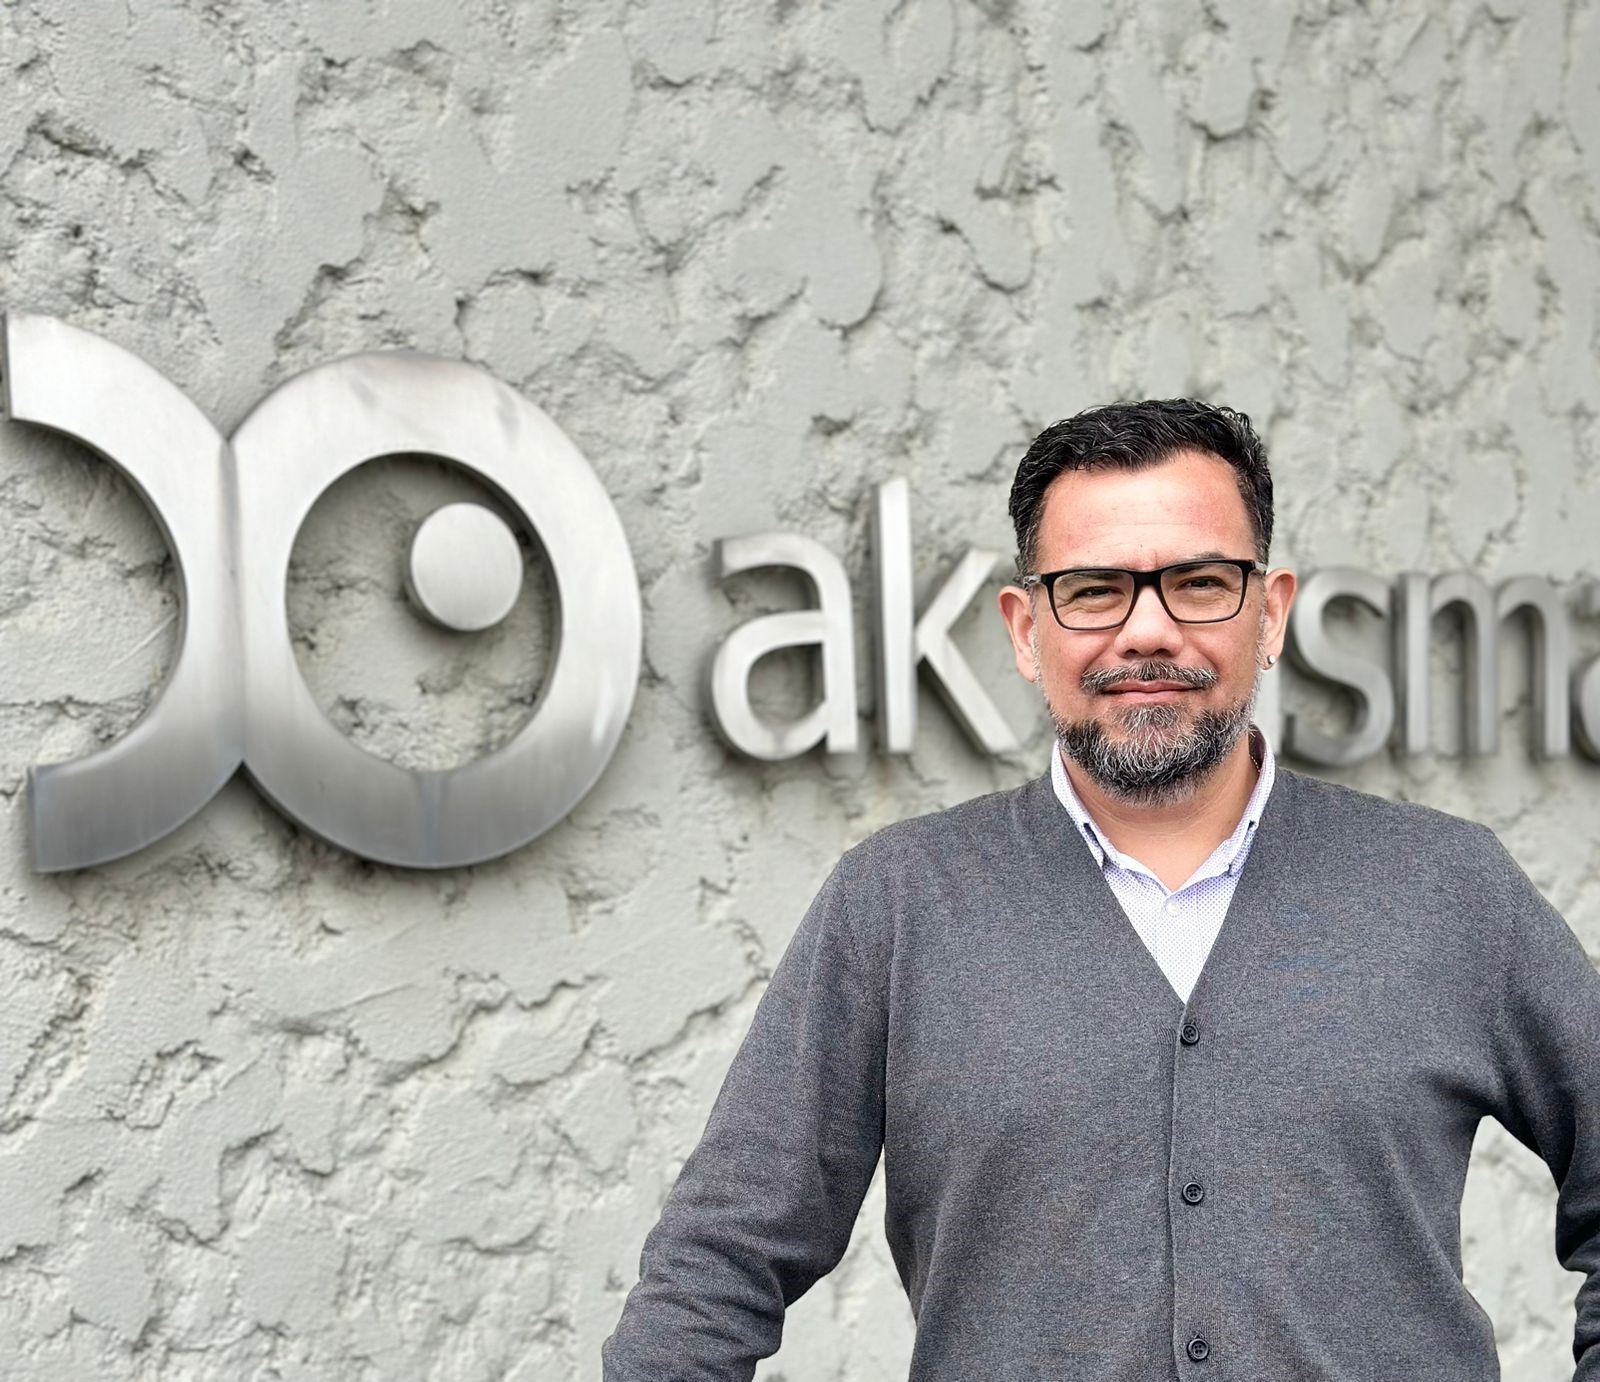 Nombran nuevo Product Manager Nets de AKVA group Chile